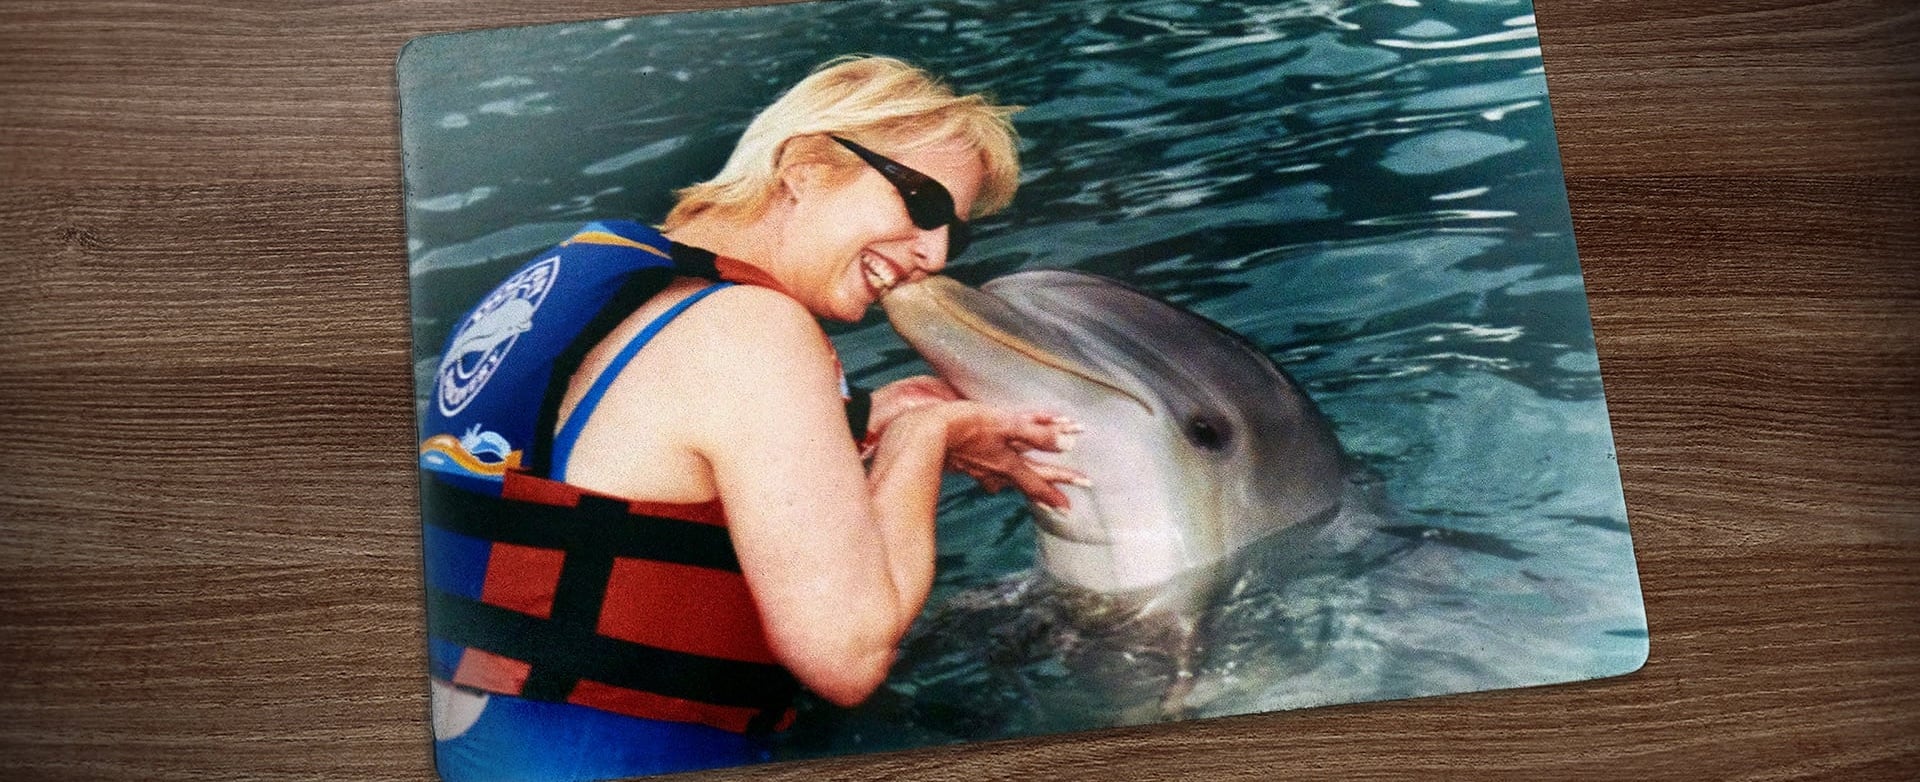 Teresa with Dolphin 